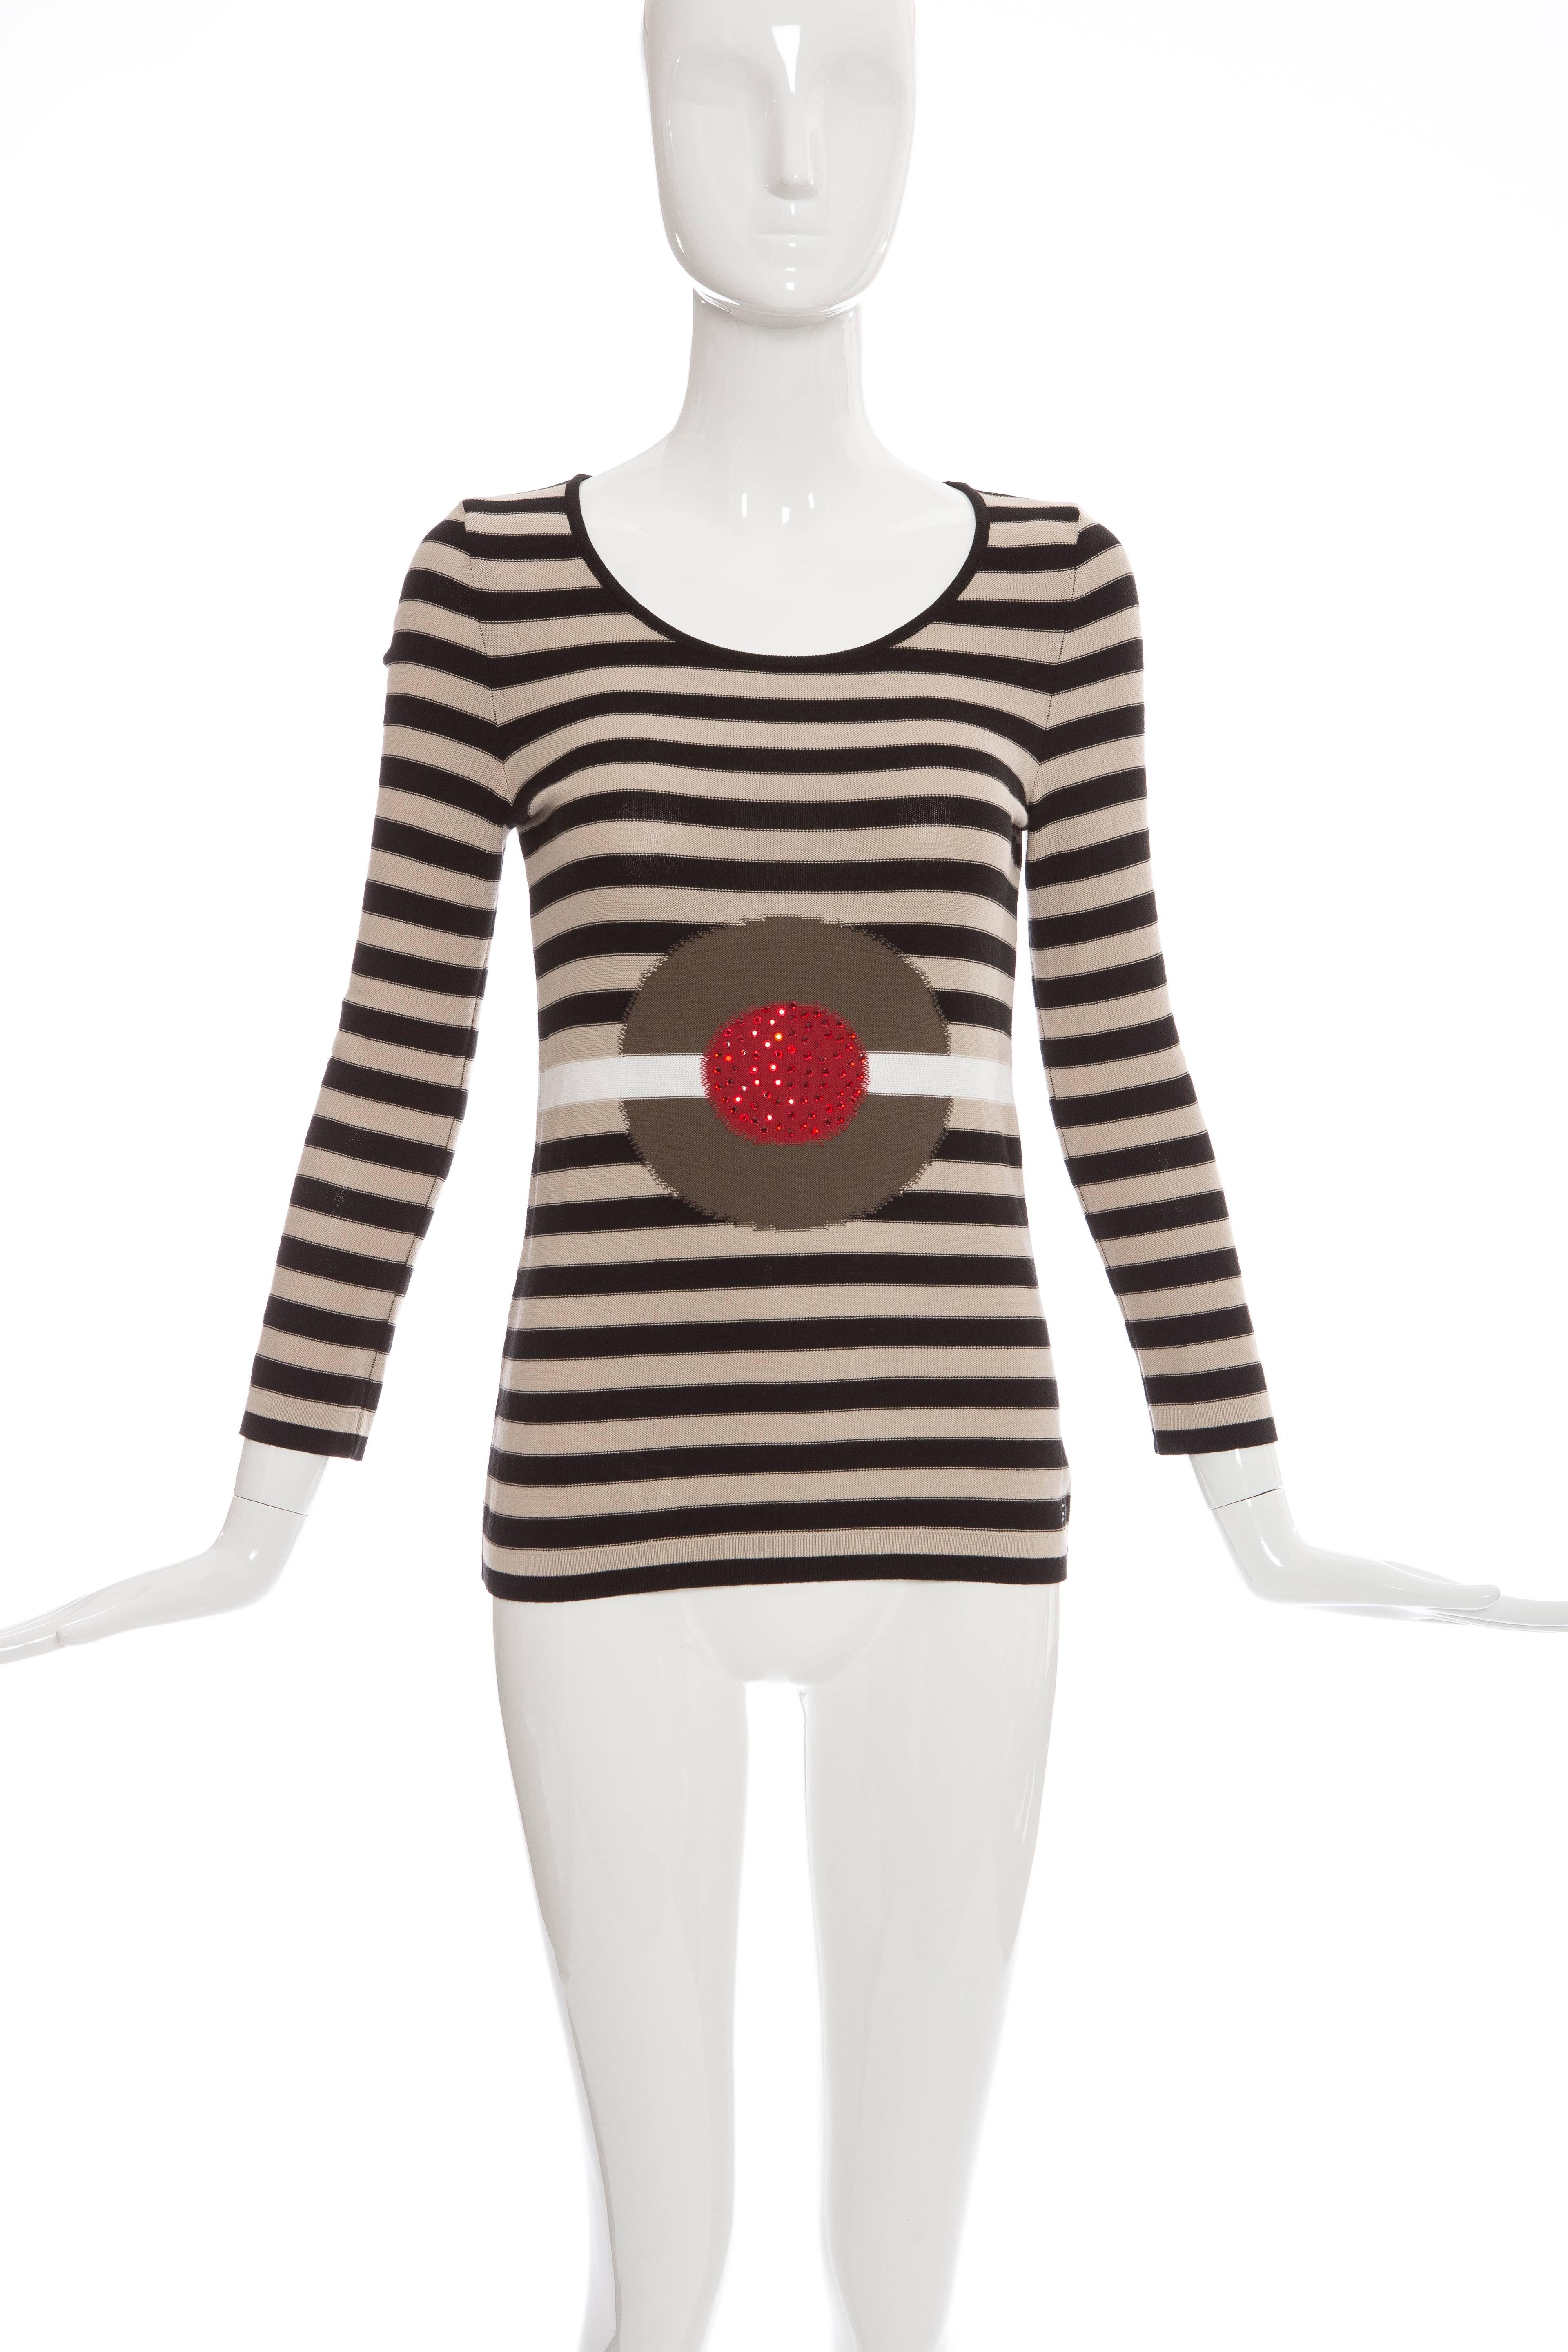 Sonia Rykiel, Spring-Summer 2002, long sleeve knit sweater with scoop neck, embellishment at front and striped pattern throughout.

FR. 36
US. 4

Bust 34”, Waist 26”, Length 24”